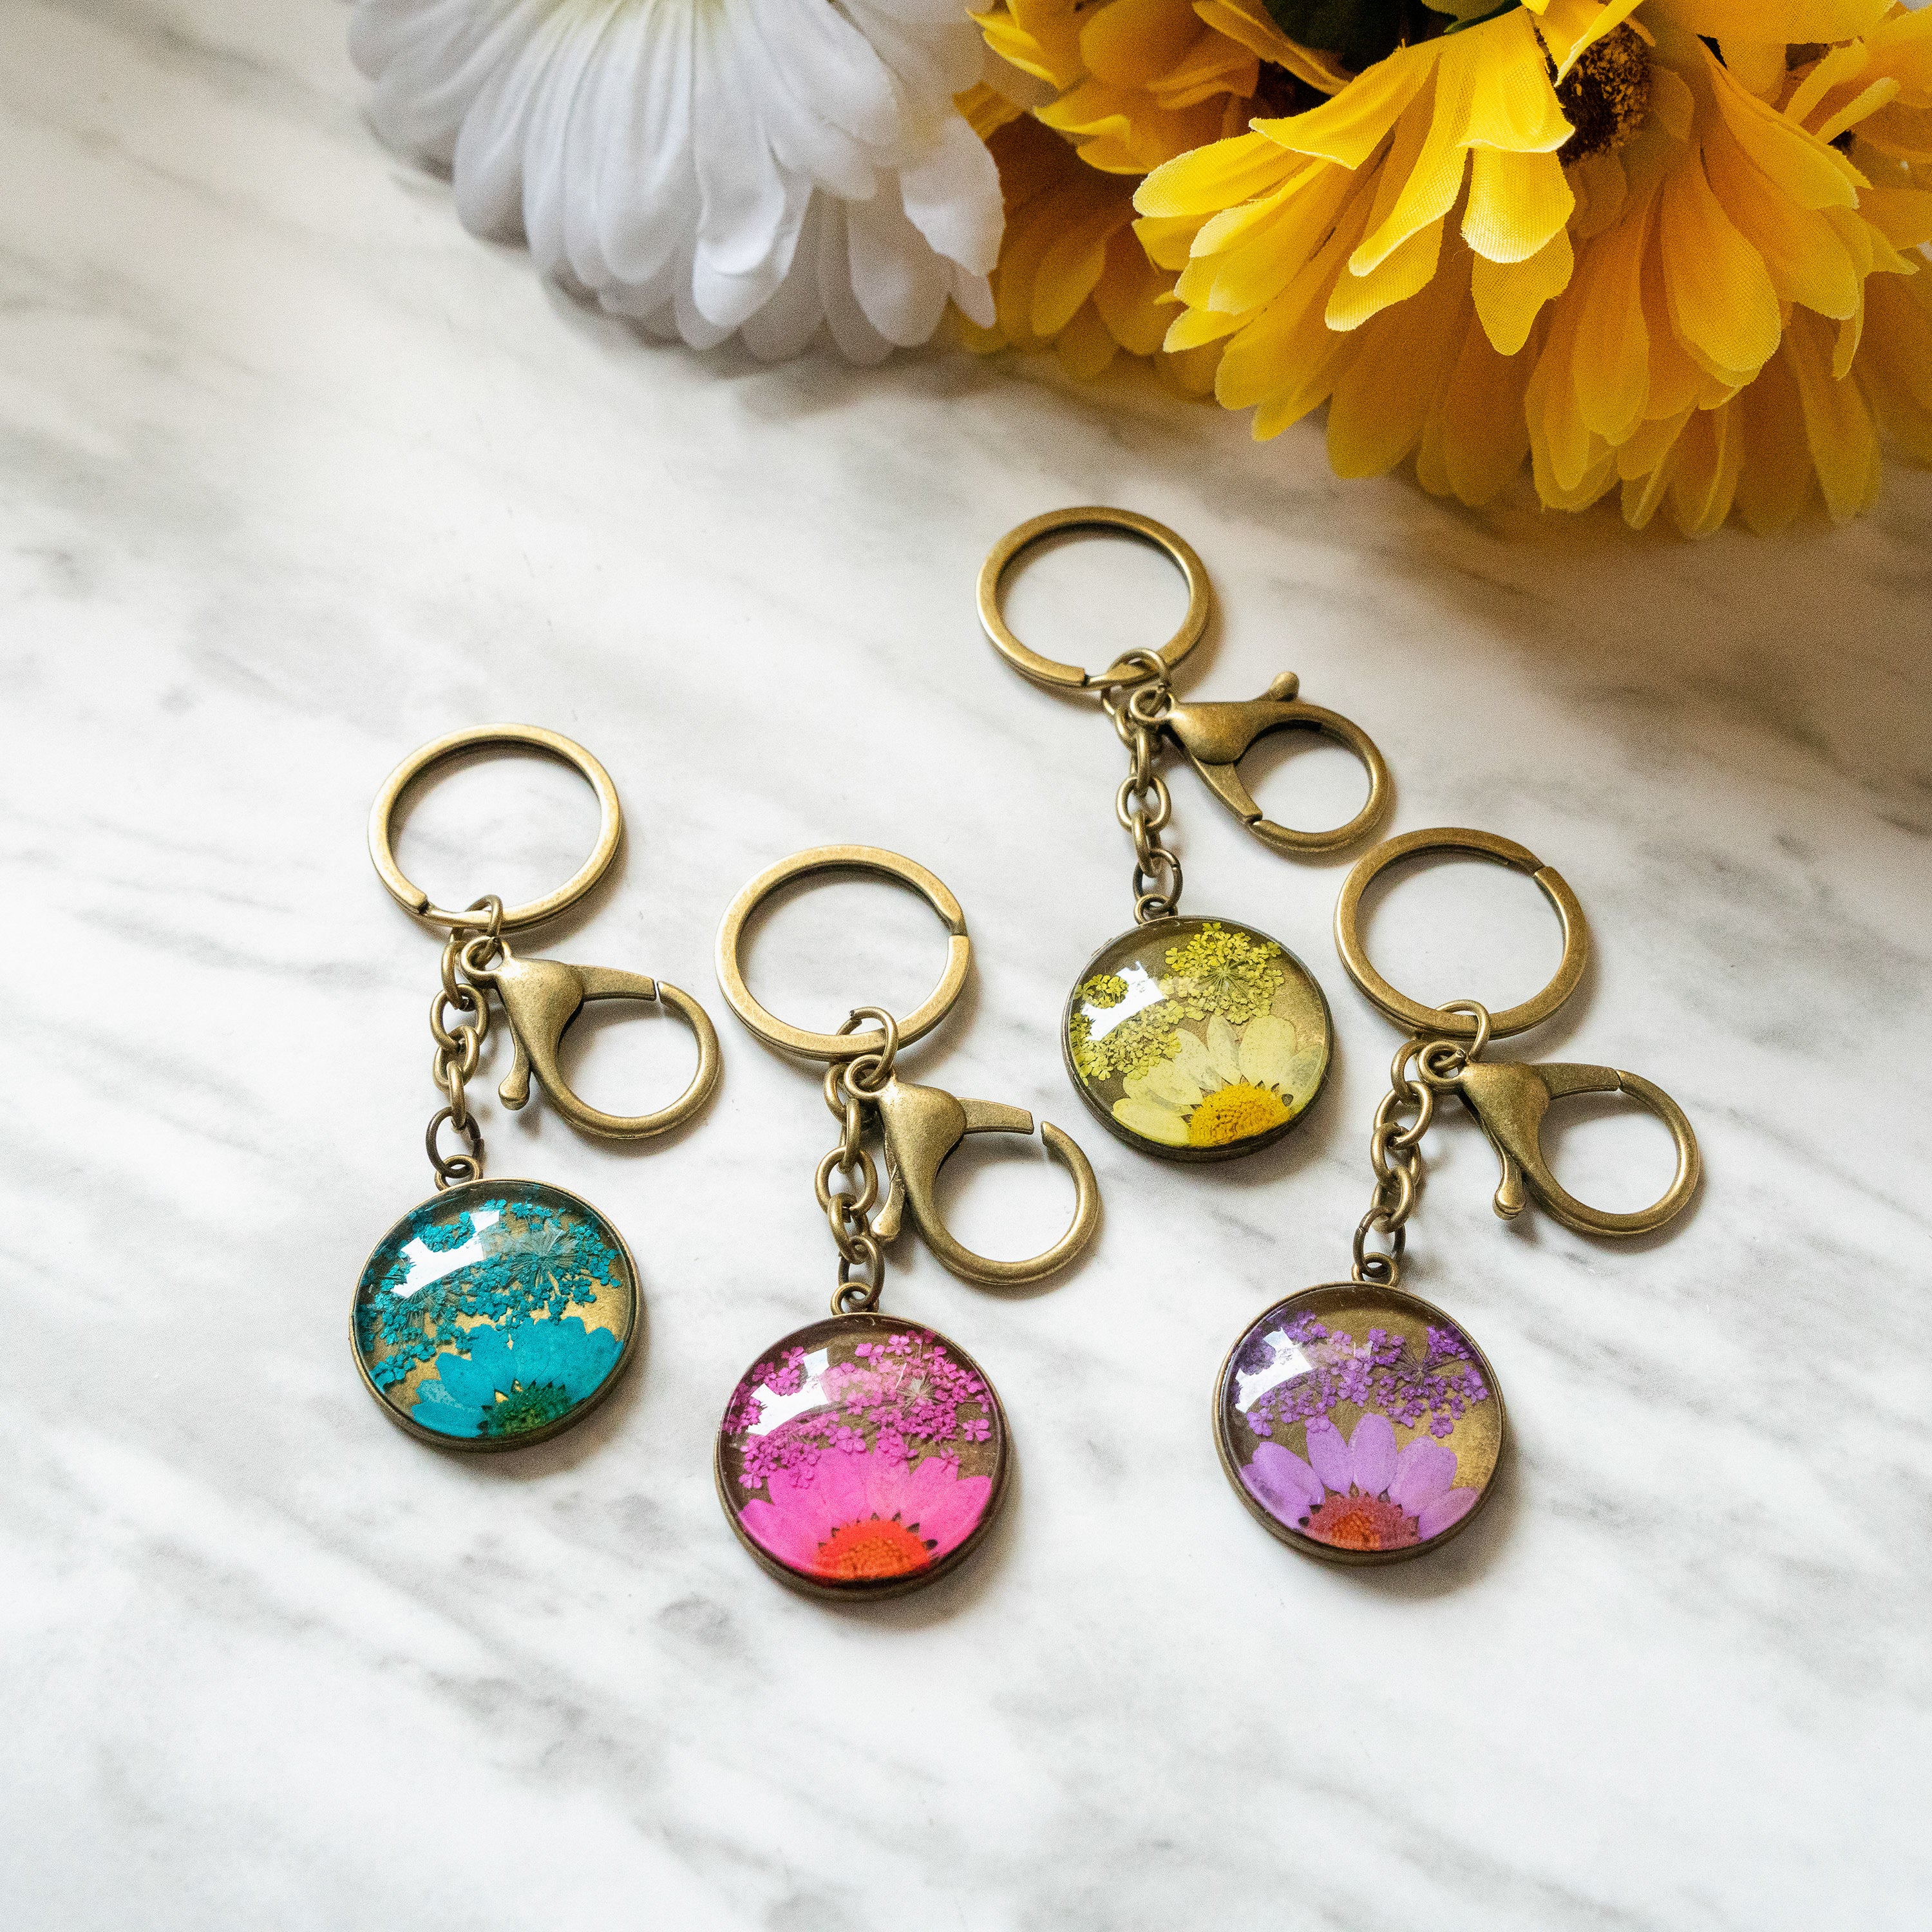 Real Pressed Flower Resin Keychain with Daisy and Lace Floral Neverland Floralfy 01